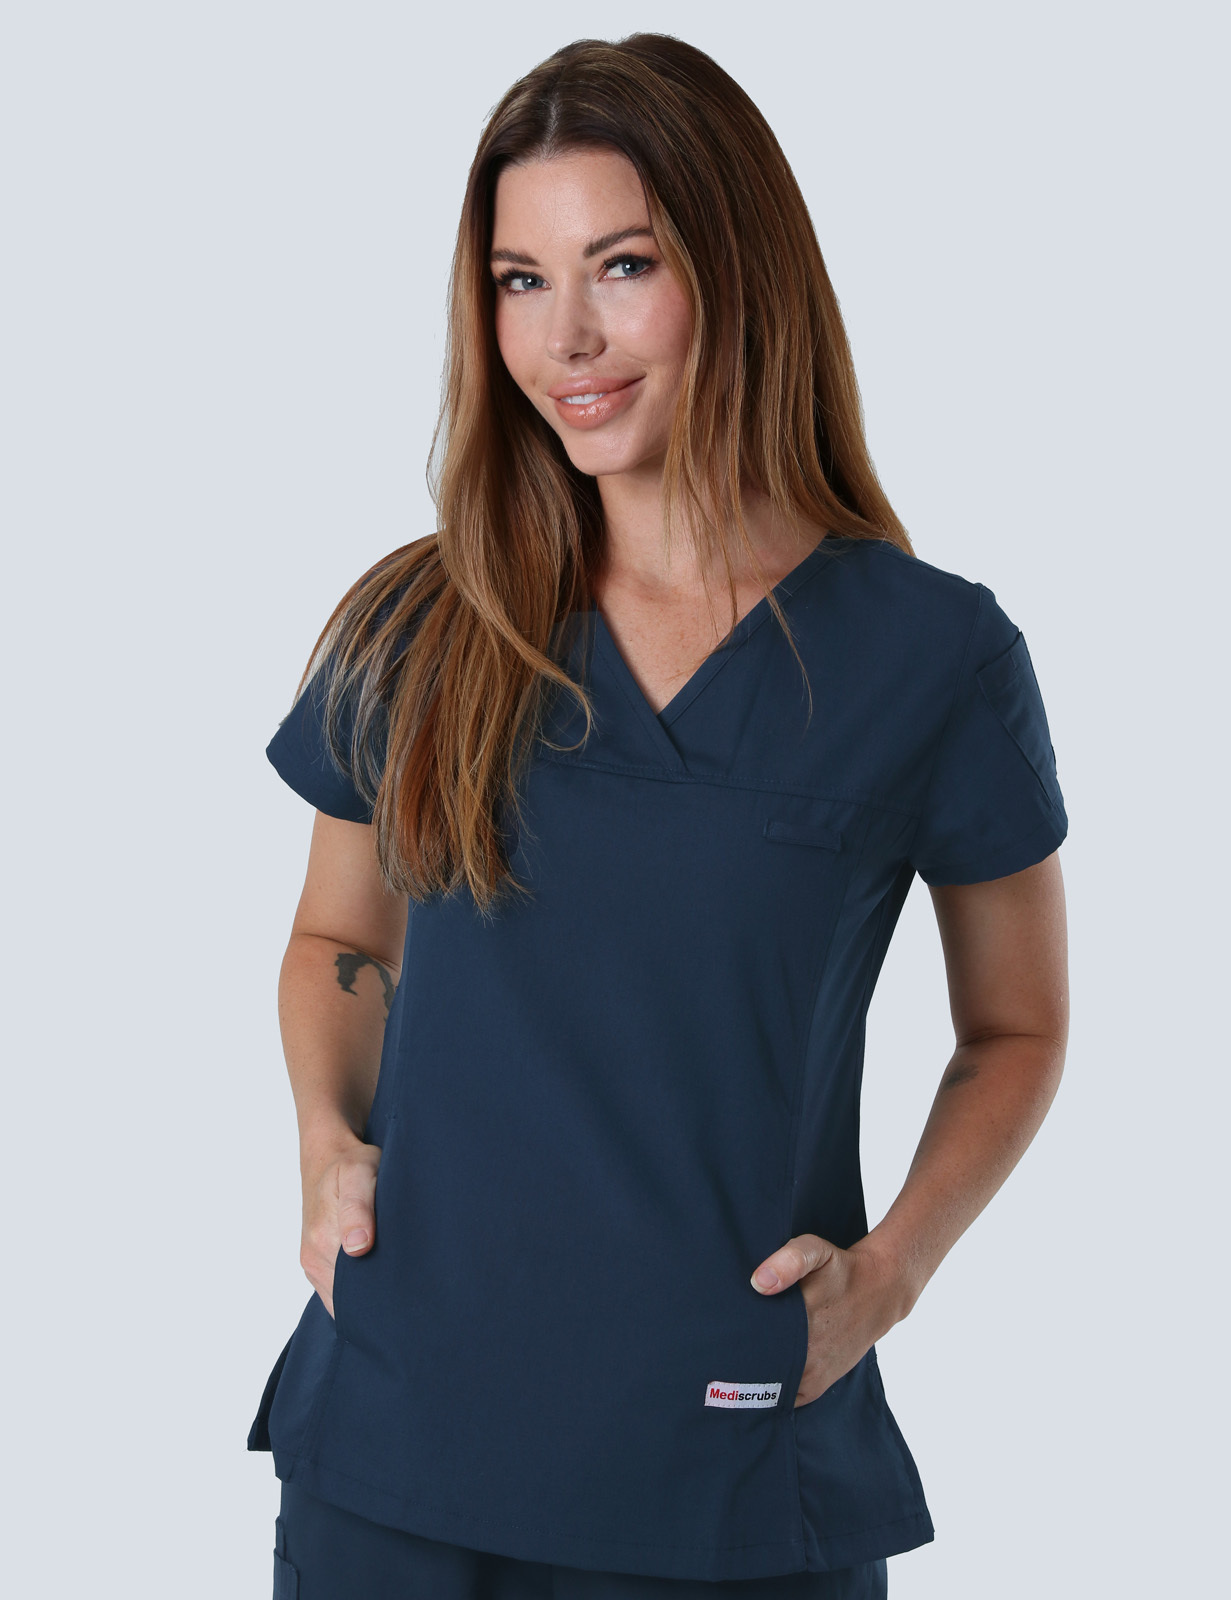 Peninsula Health - ED Emergency Nurse (Women's Fit Solid and Cargo Pants in Navy incl Logos)